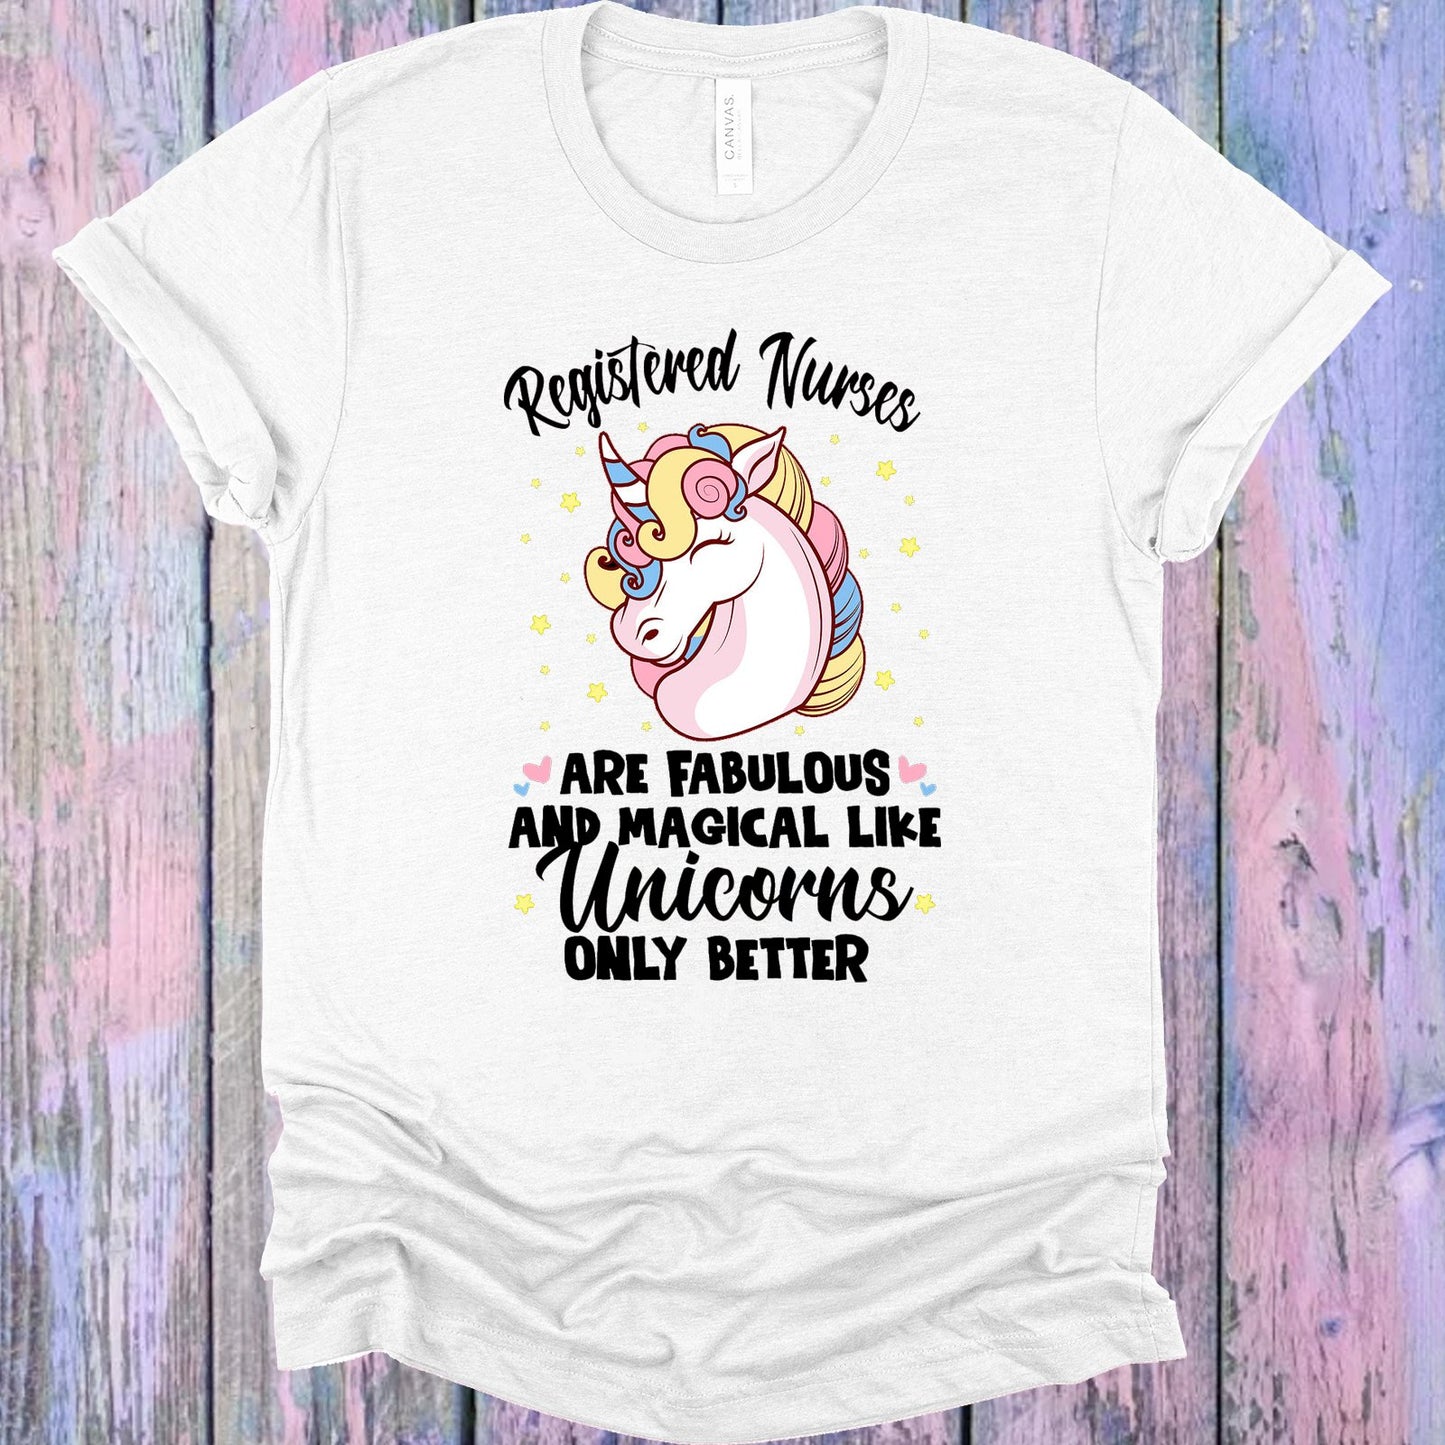 Registered Nurses Are Fabulous And Magical Like Unicorns Only Better Graphic Tee Graphic Tee